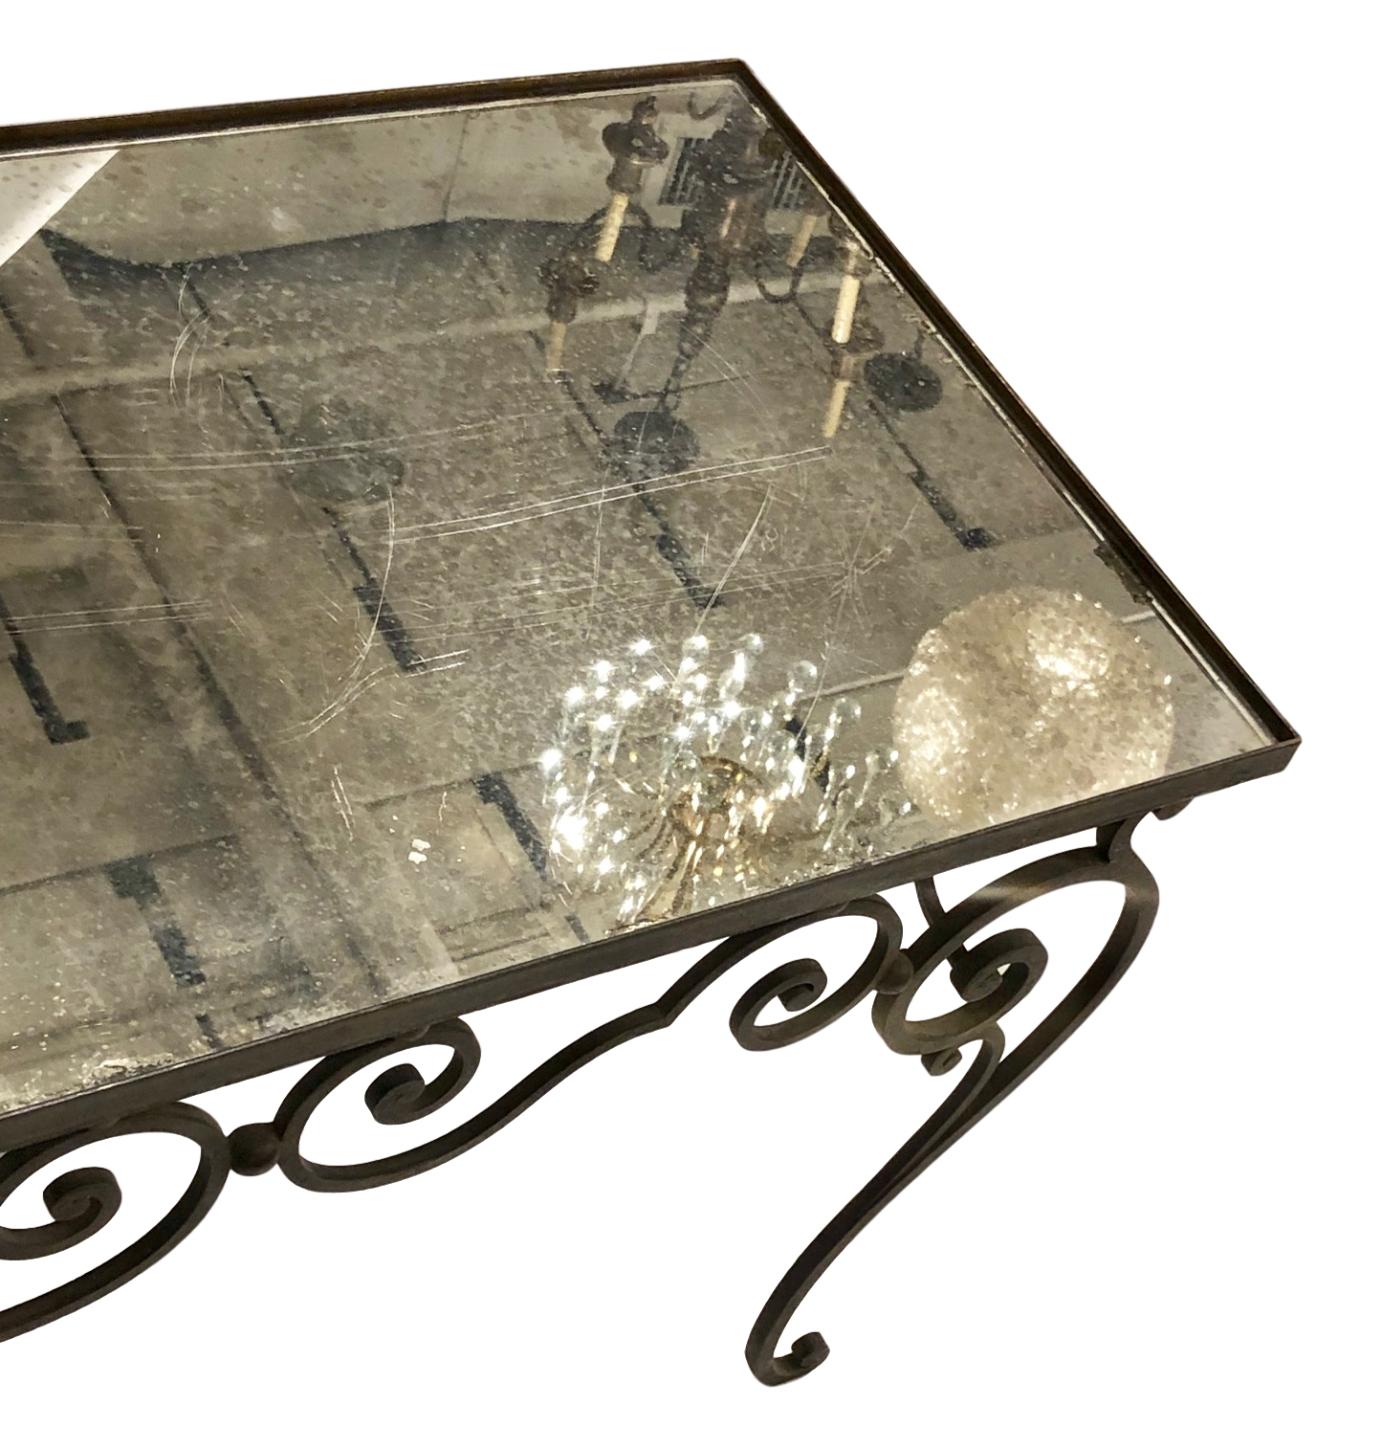 A French circa 1940s wrought iron coffee table with mirror top.

Measurements:
Height 17.25